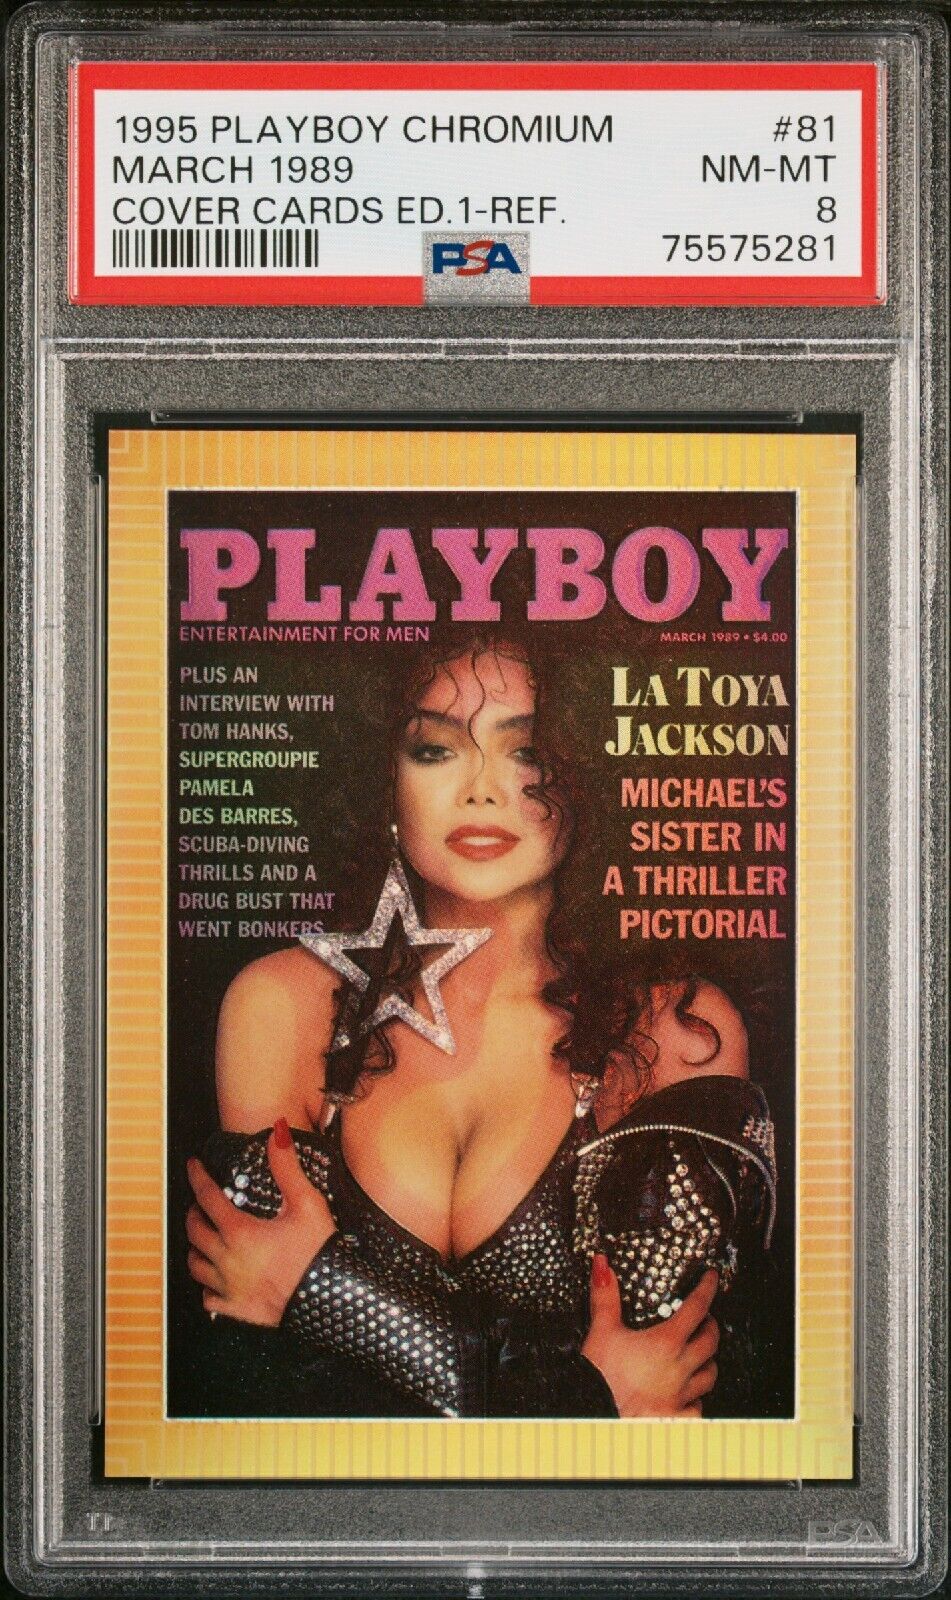 1995 Playboy Chromium March 1989 Cover Cards Refractor PSA 8